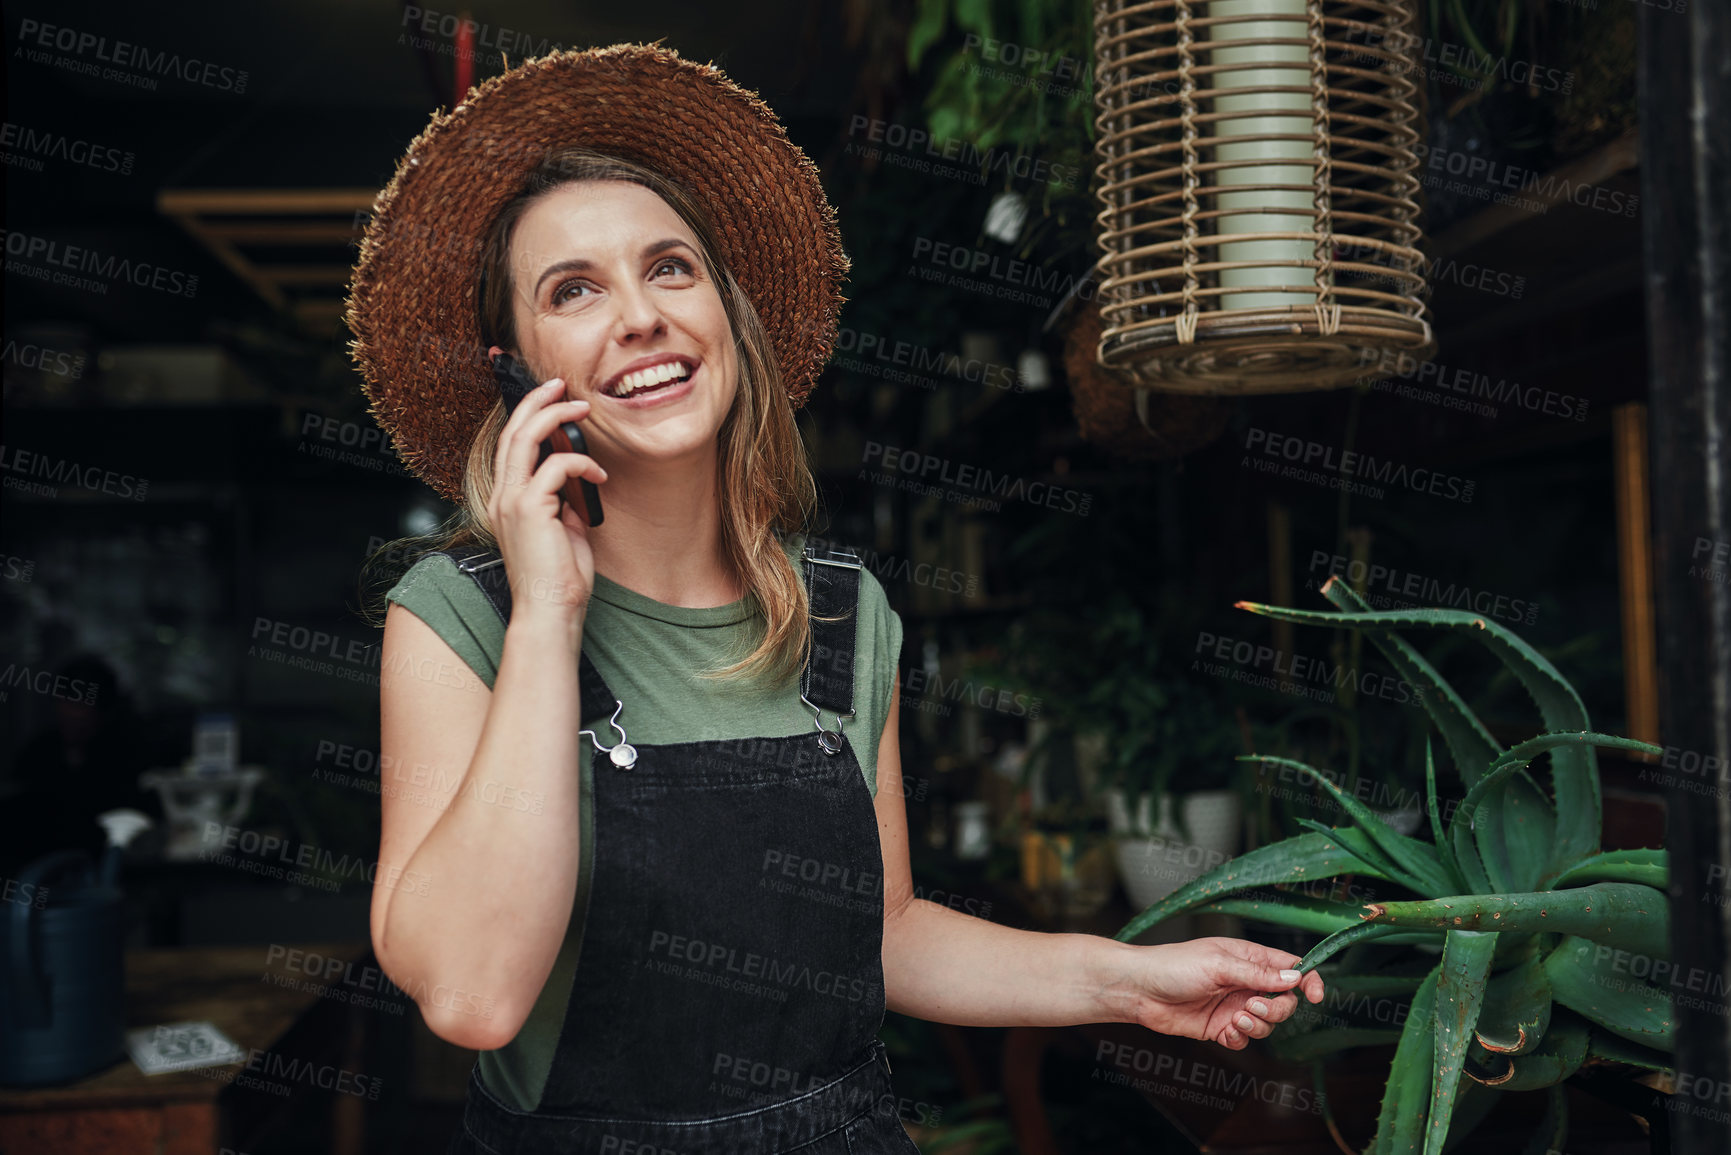 Buy stock photo Cropped shot of an attractive young business owner standing alone at the entrance of her floristry while on a phonecall